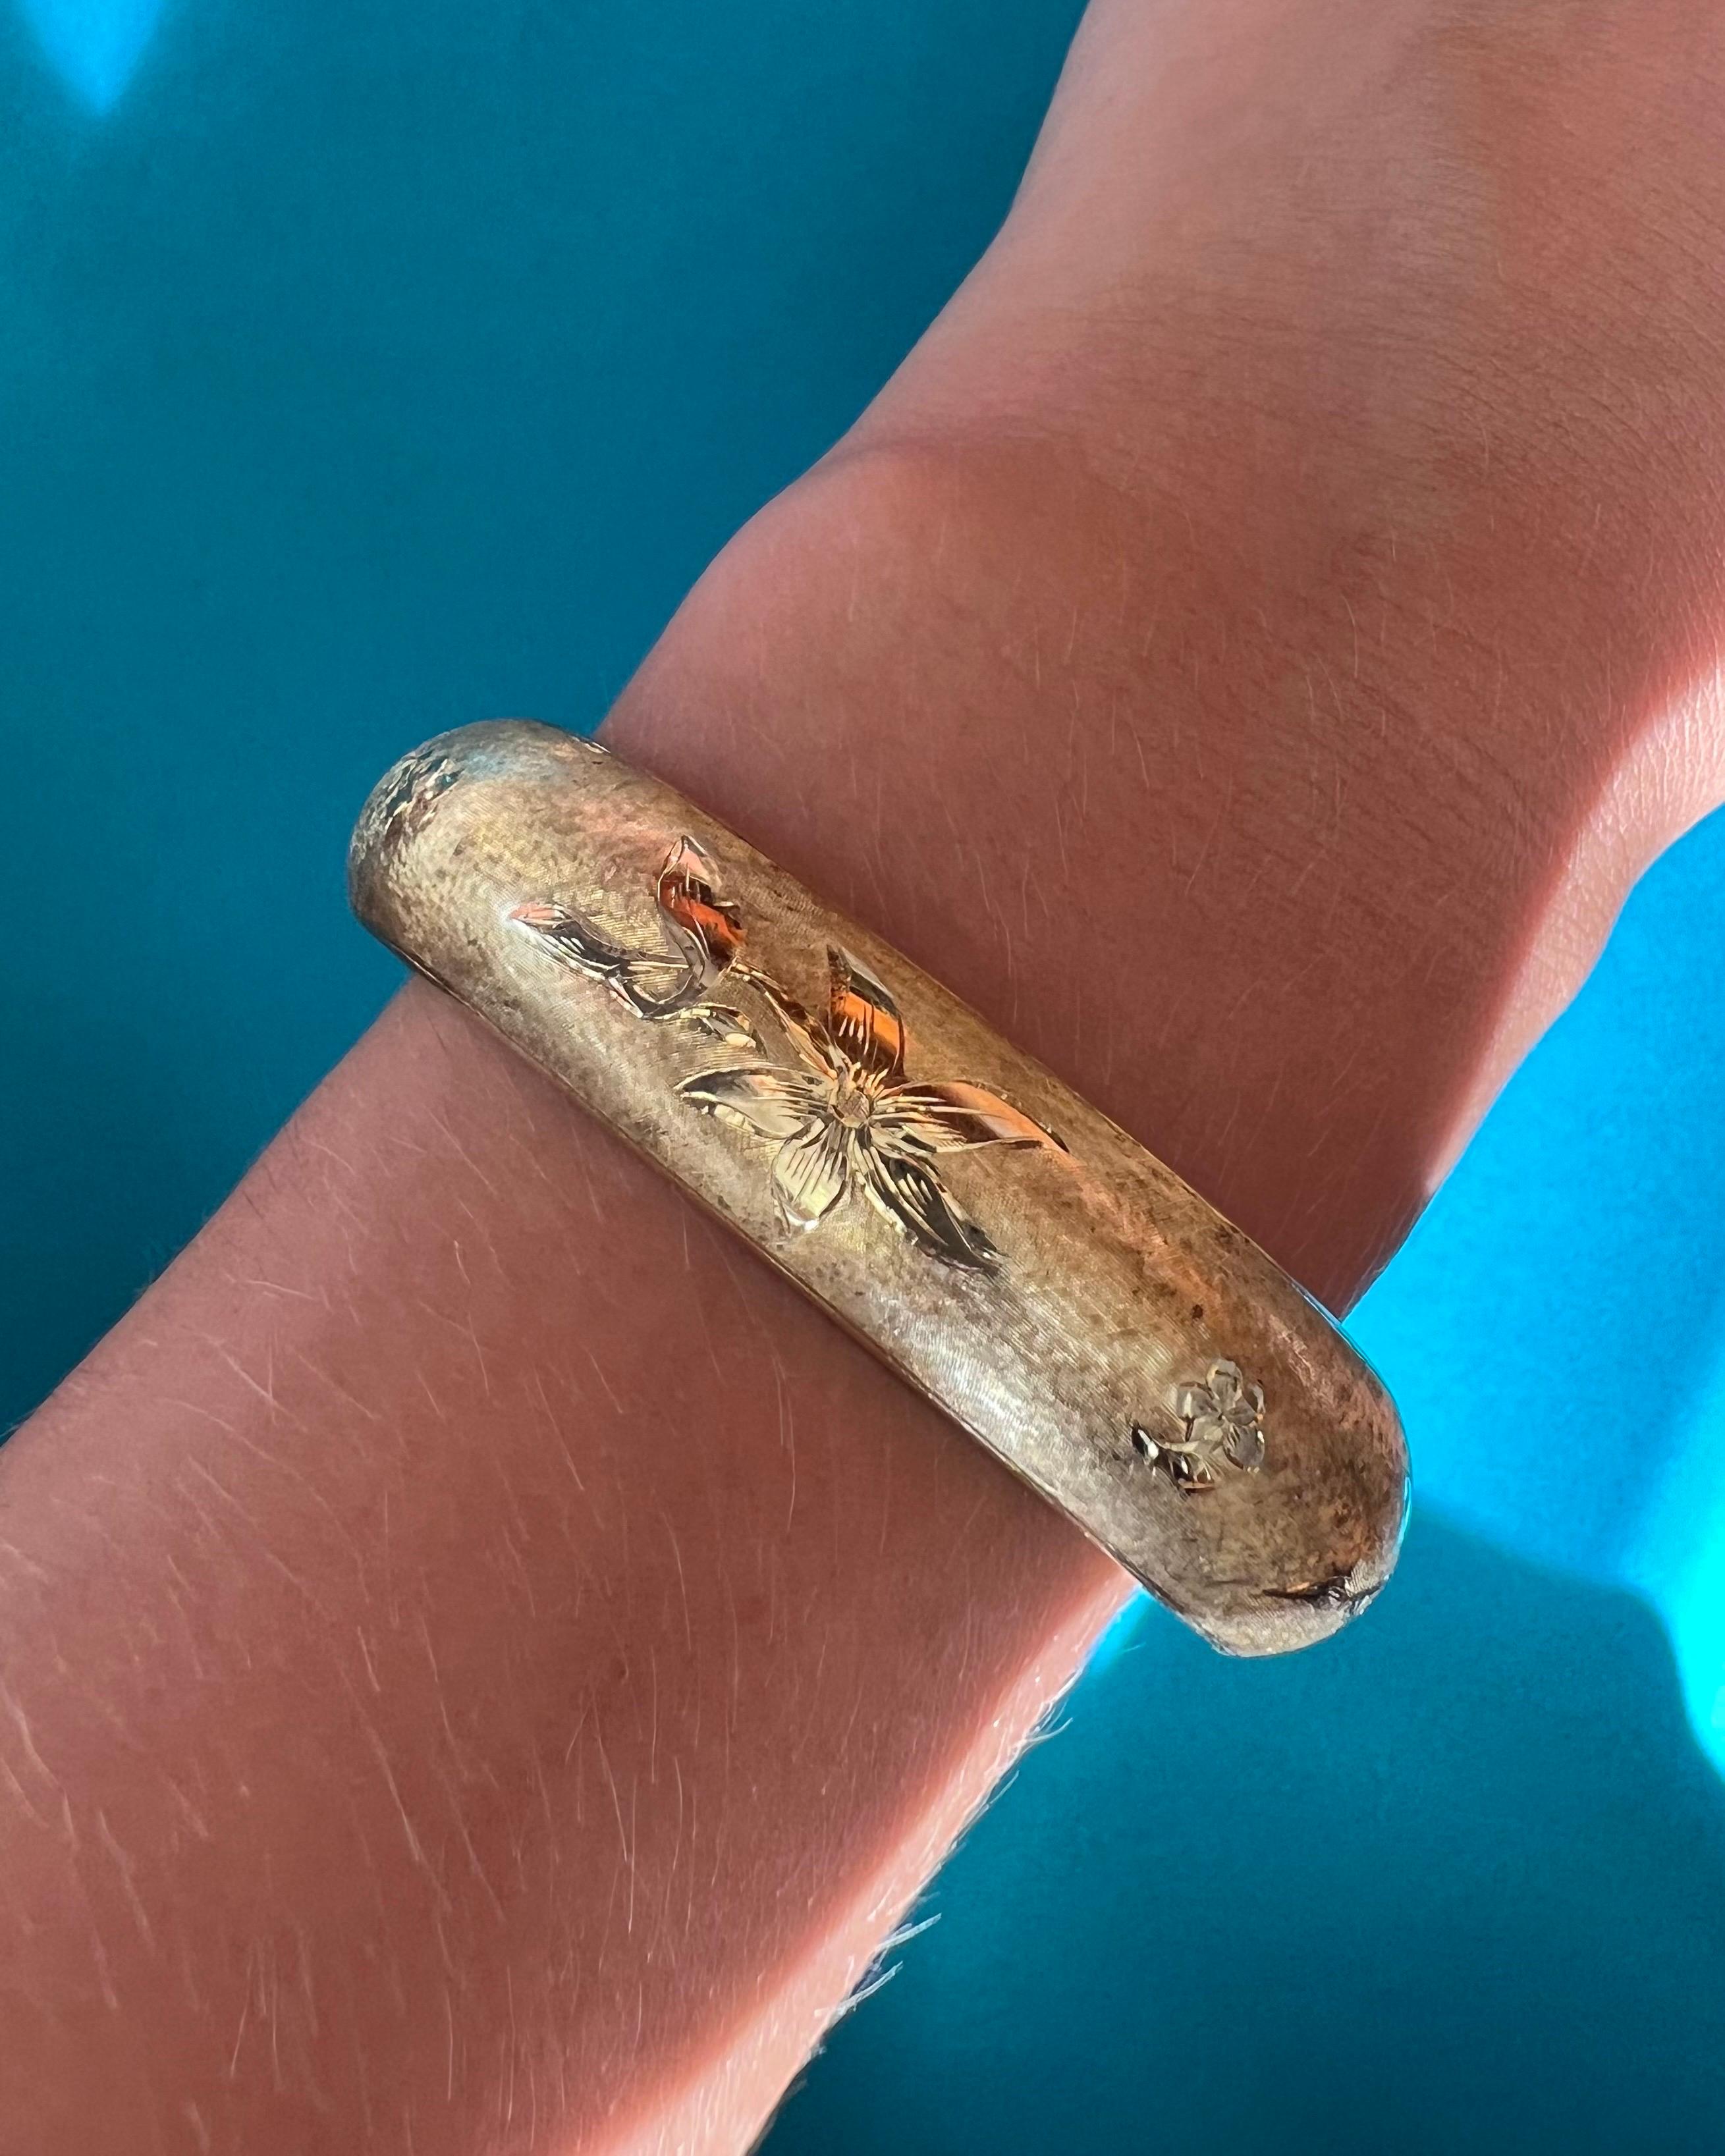 A vintage 14 karat gold bangle bracelet engraved with a lovely floral design. The gold surface of the bracelet is beautifully satined and engraved with a floral motif of stems and petals. The gold surface on the inner side is highly polished. The